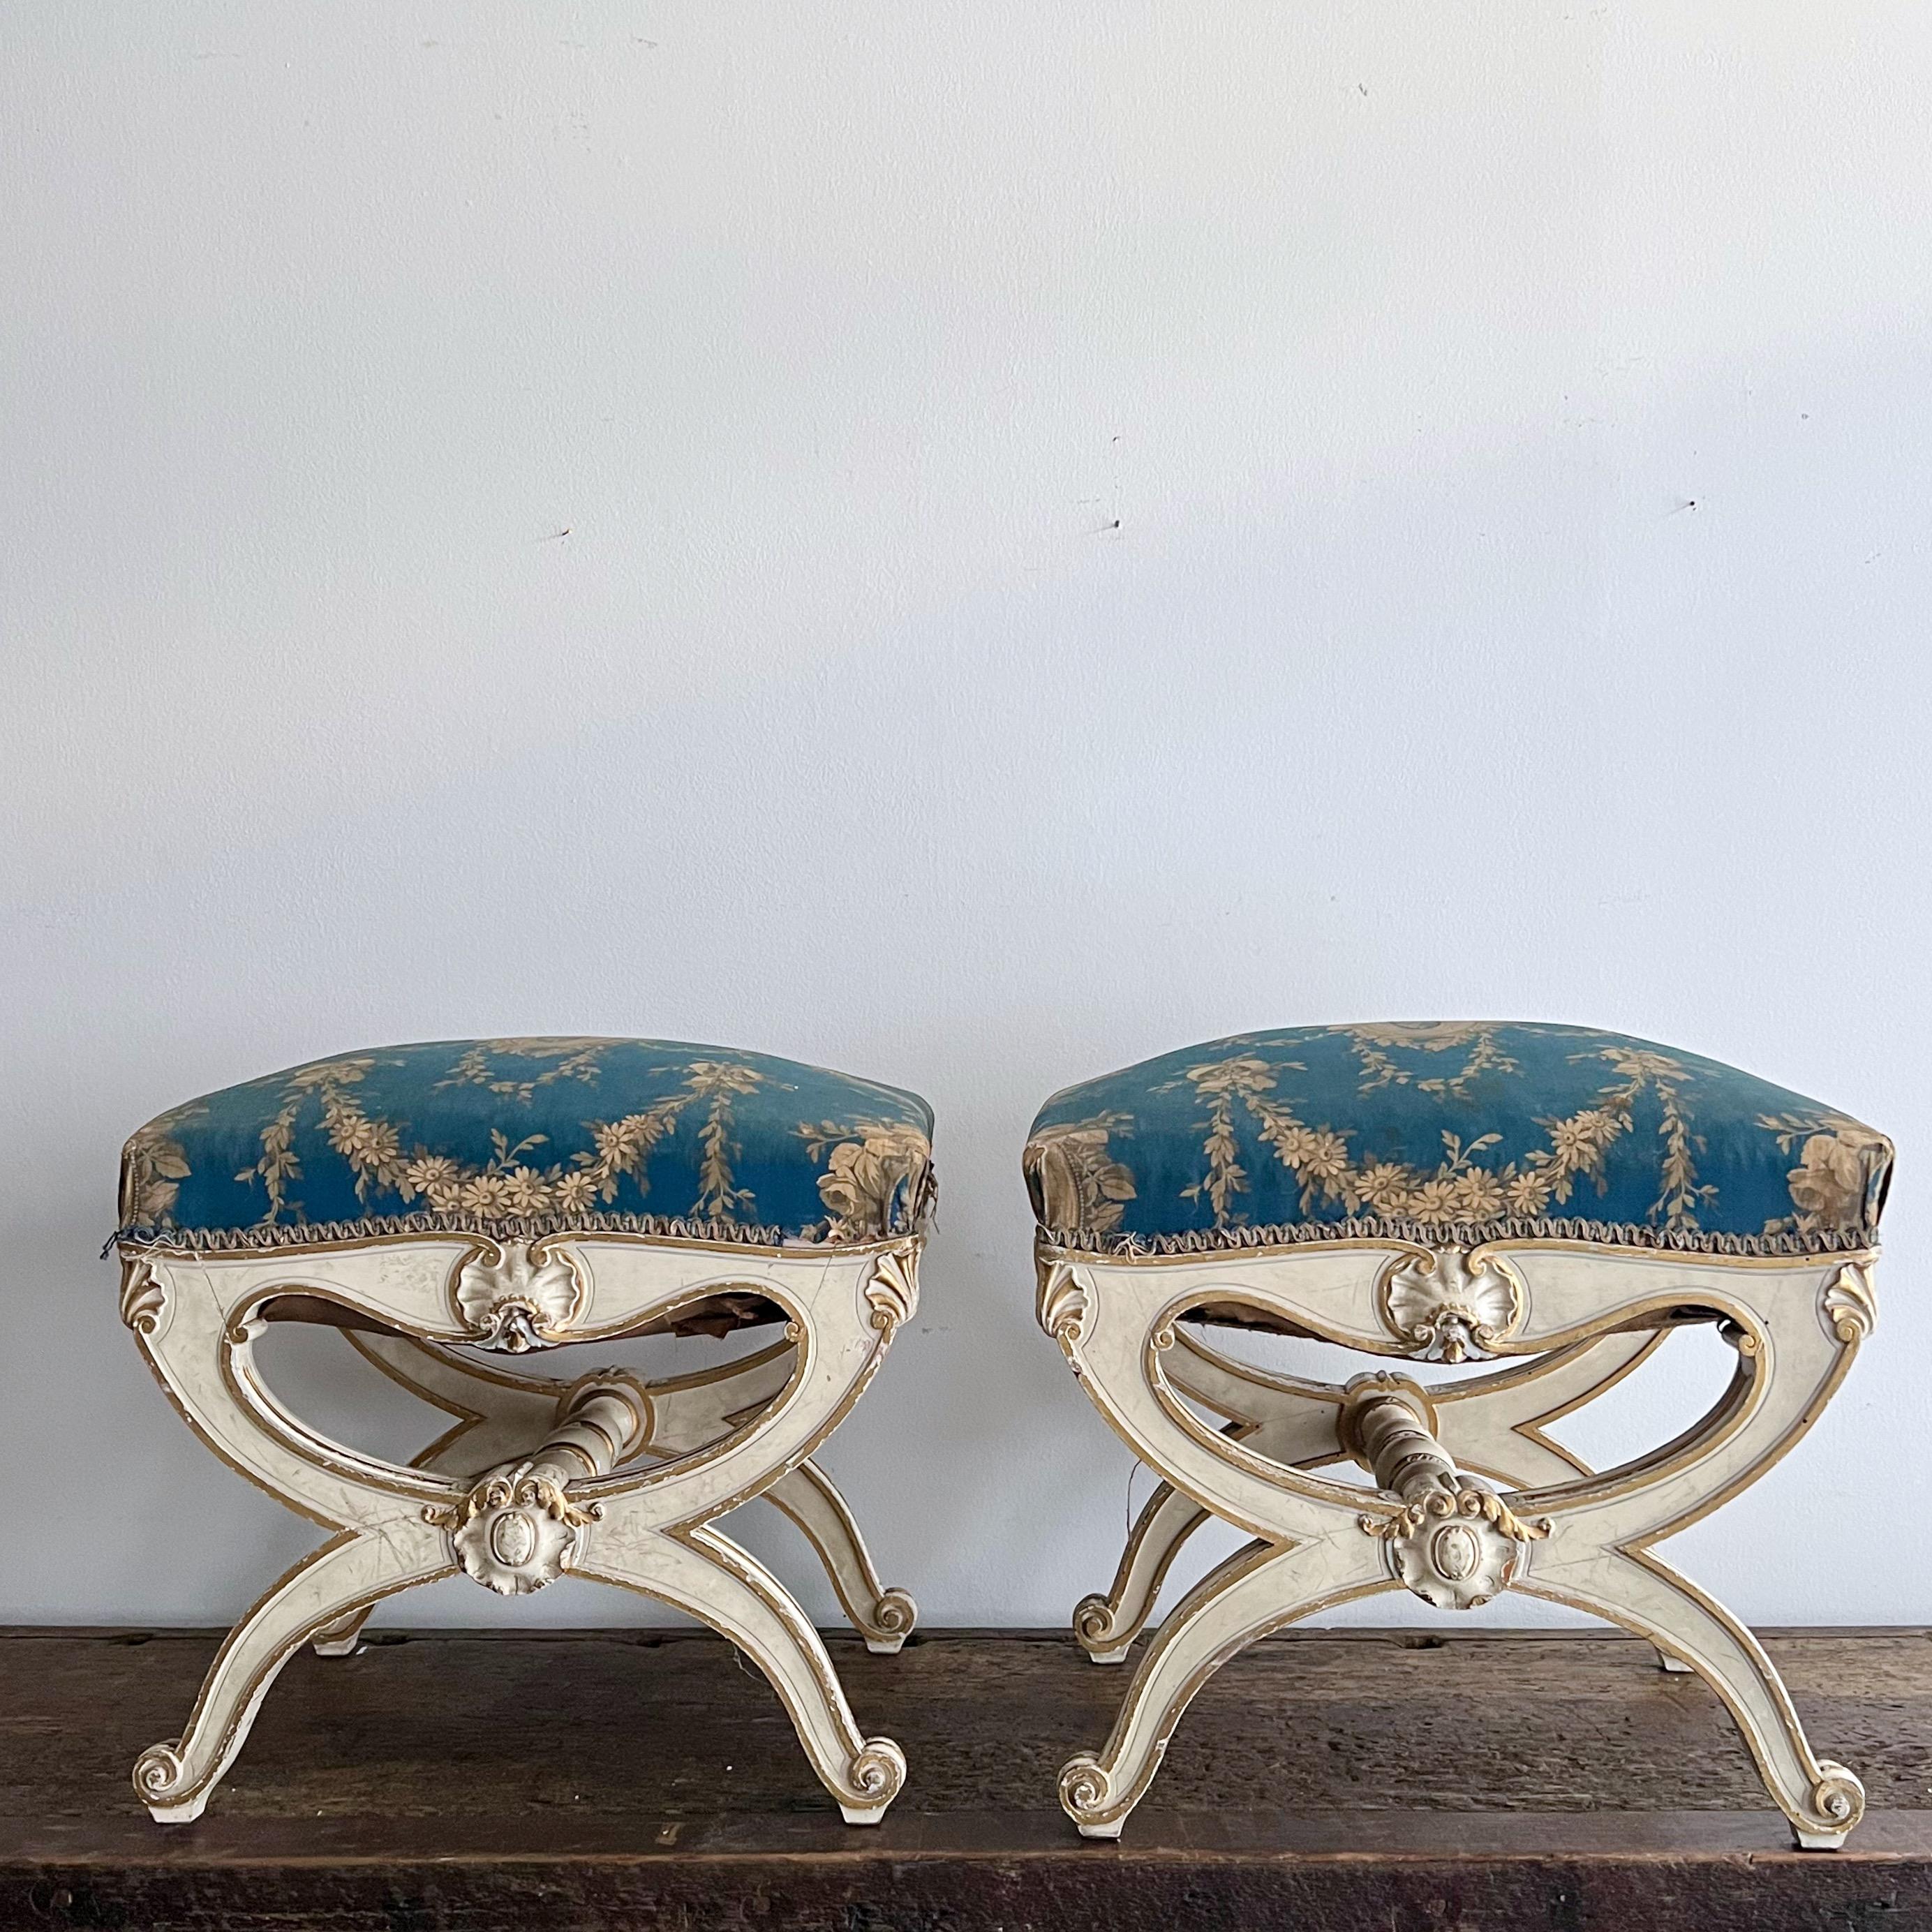 Pair of 19th century Italian Polychrome and Parcel-Gilt Curule Stools For Sale 2